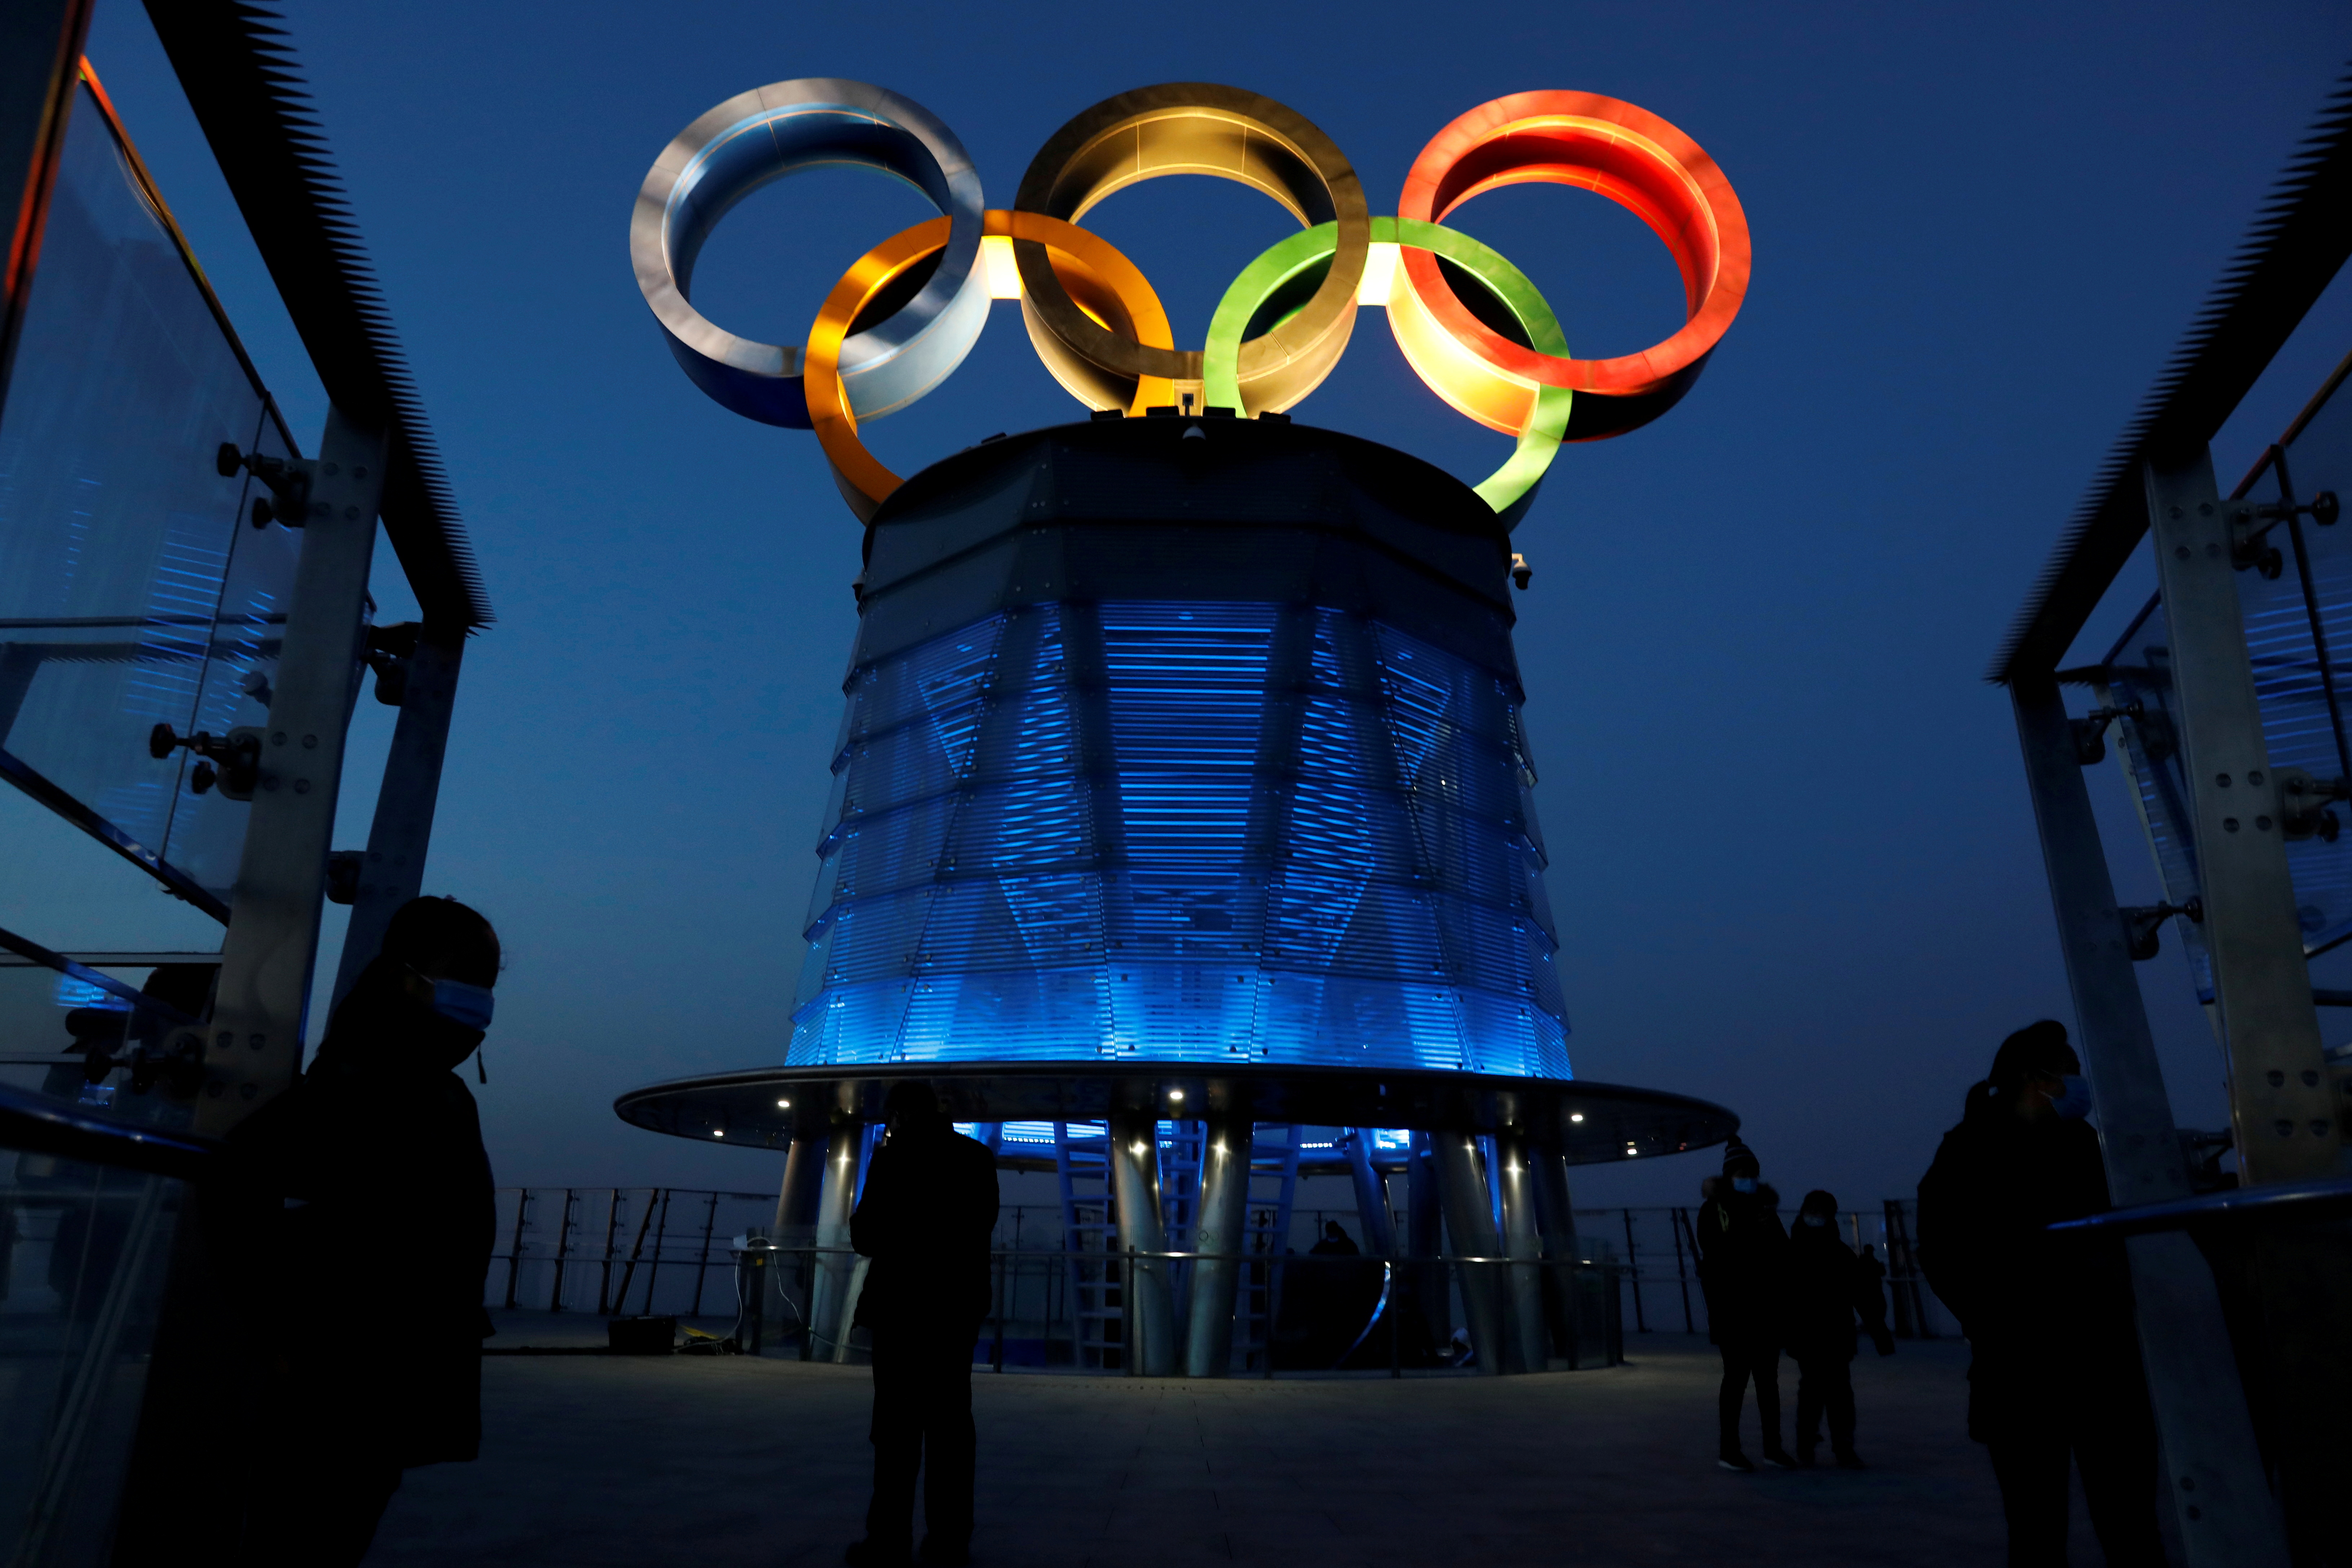 People wearing face masks following the coronavirus disease (COVID-19) outbreak are seen near the lit-up Olympic rings at top of the Olympic Tower, a year ahead of the opening of the 2022 Winter Olympic Games, in Beijing, China February 4, 2021. REUTERS/Tingshu Wang